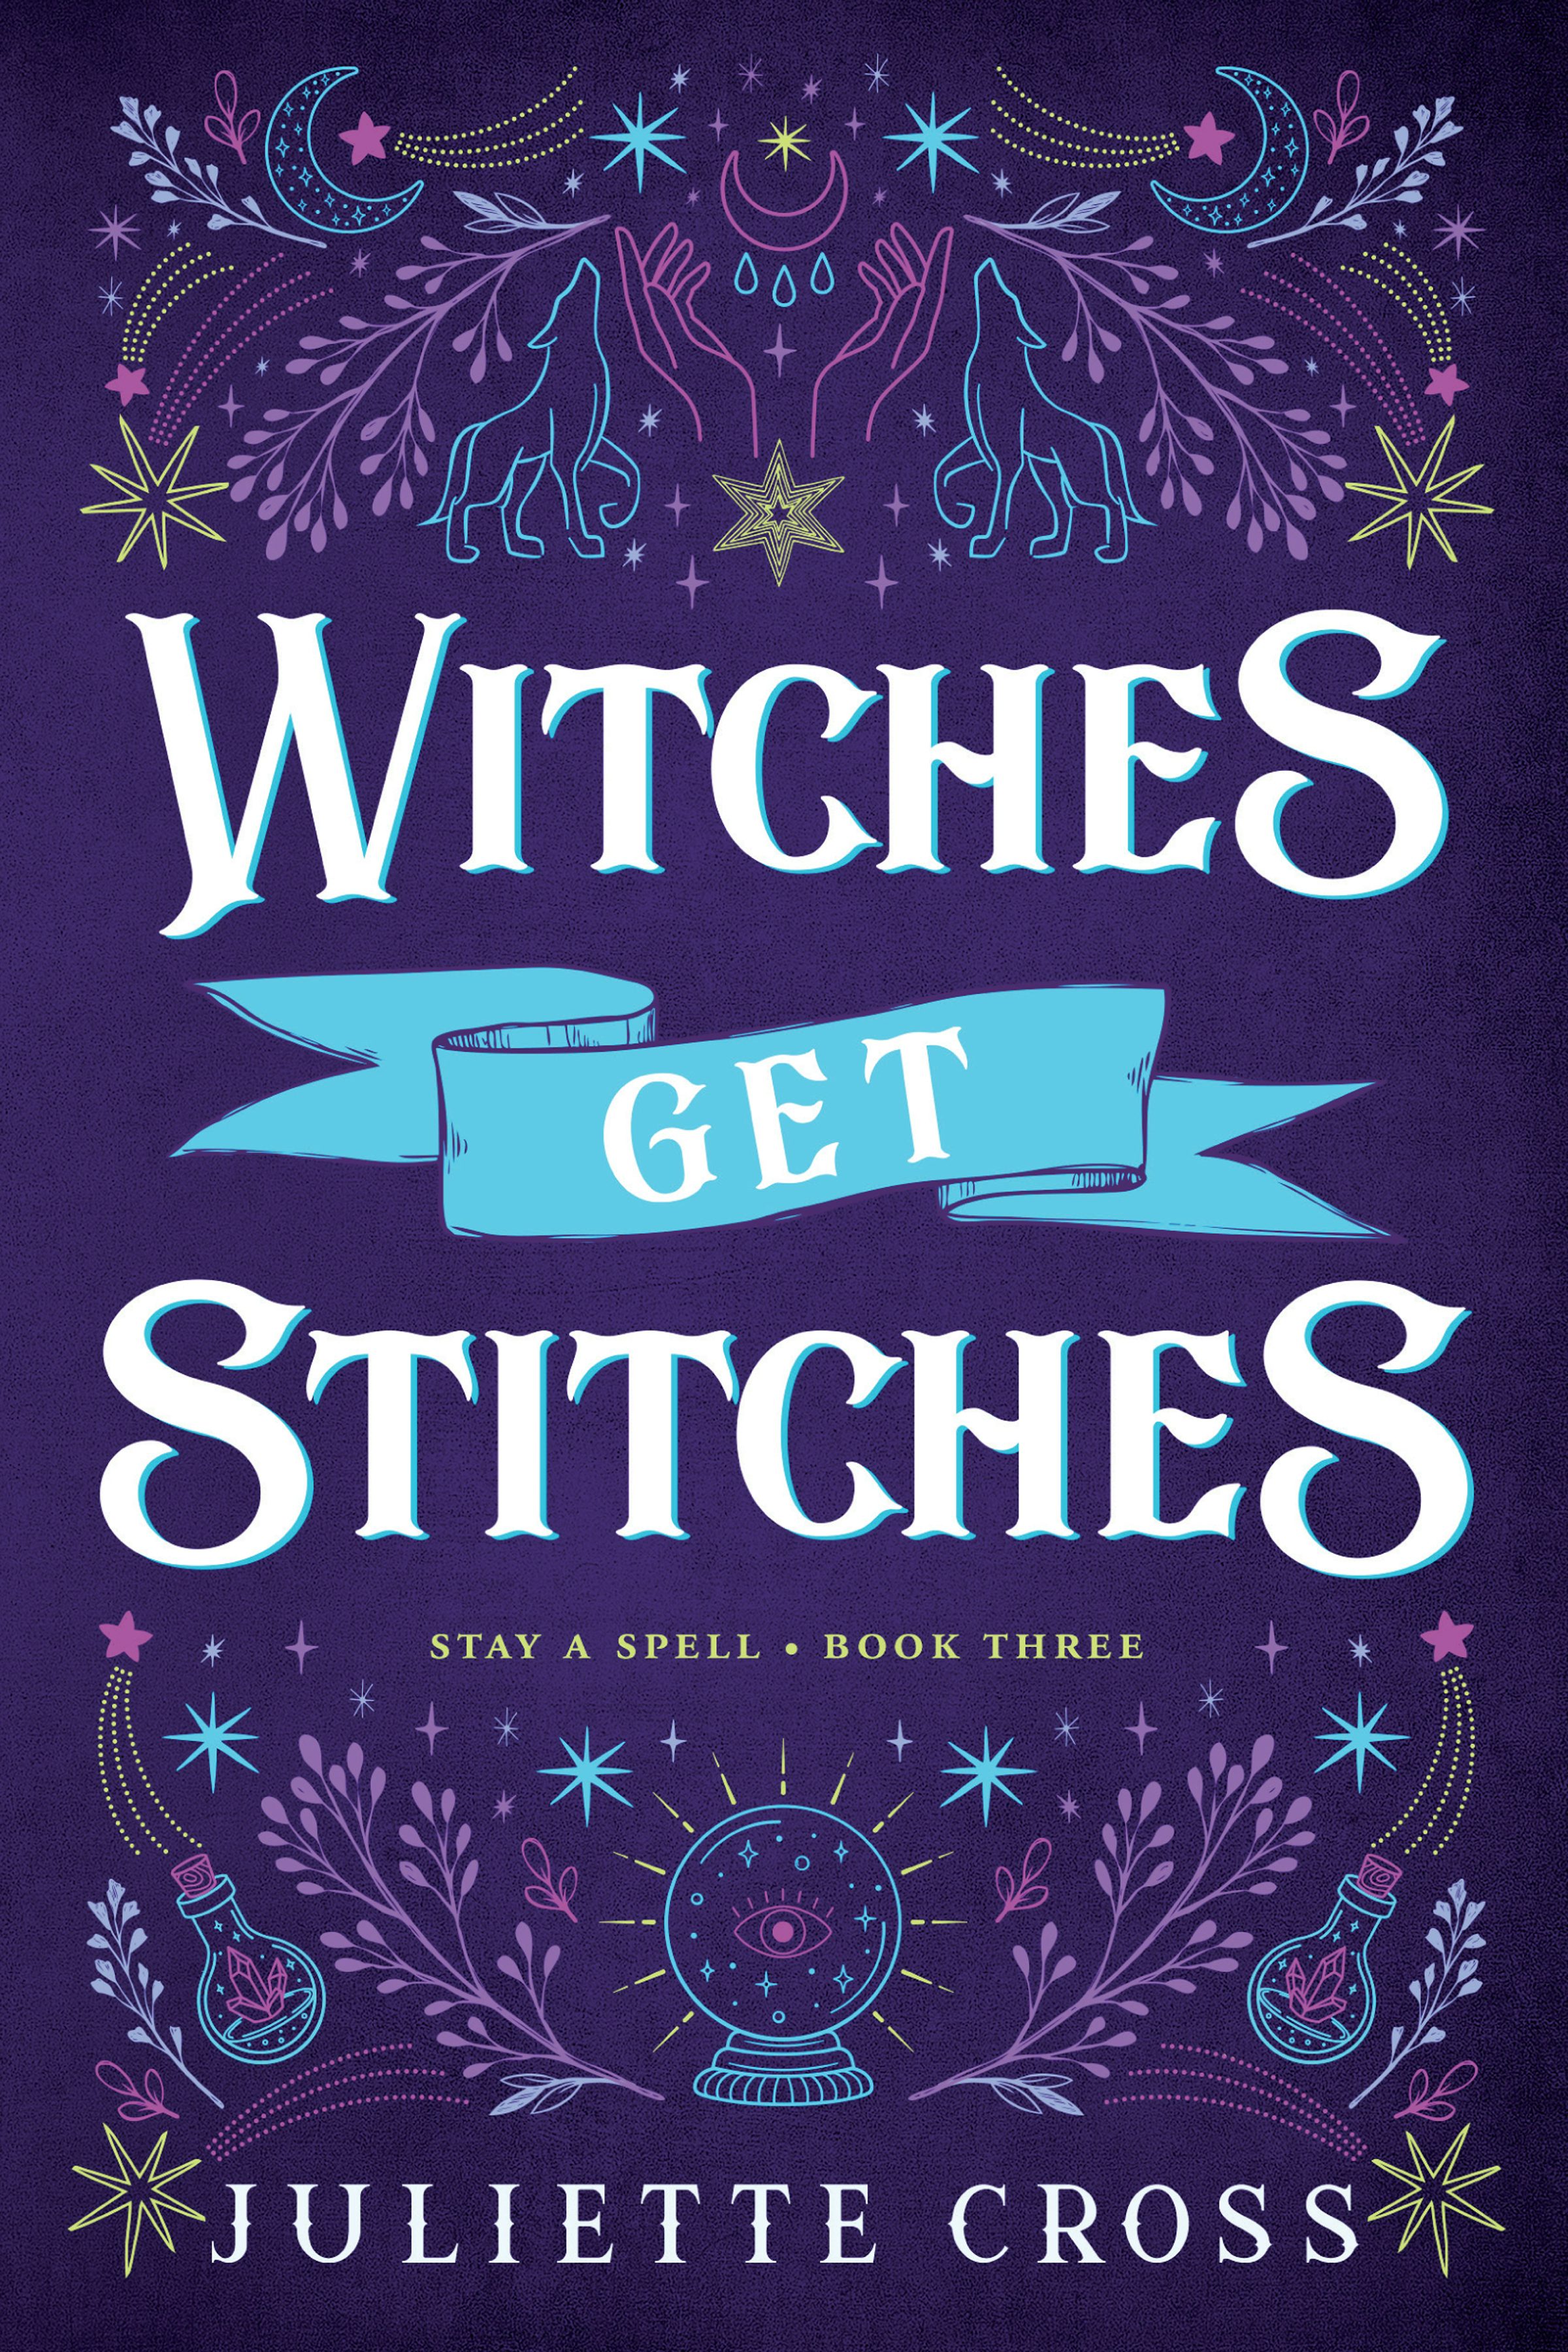 Witches Get Stitches by Juliette Cross: 9781454953647 - Union Square u0026 Co.